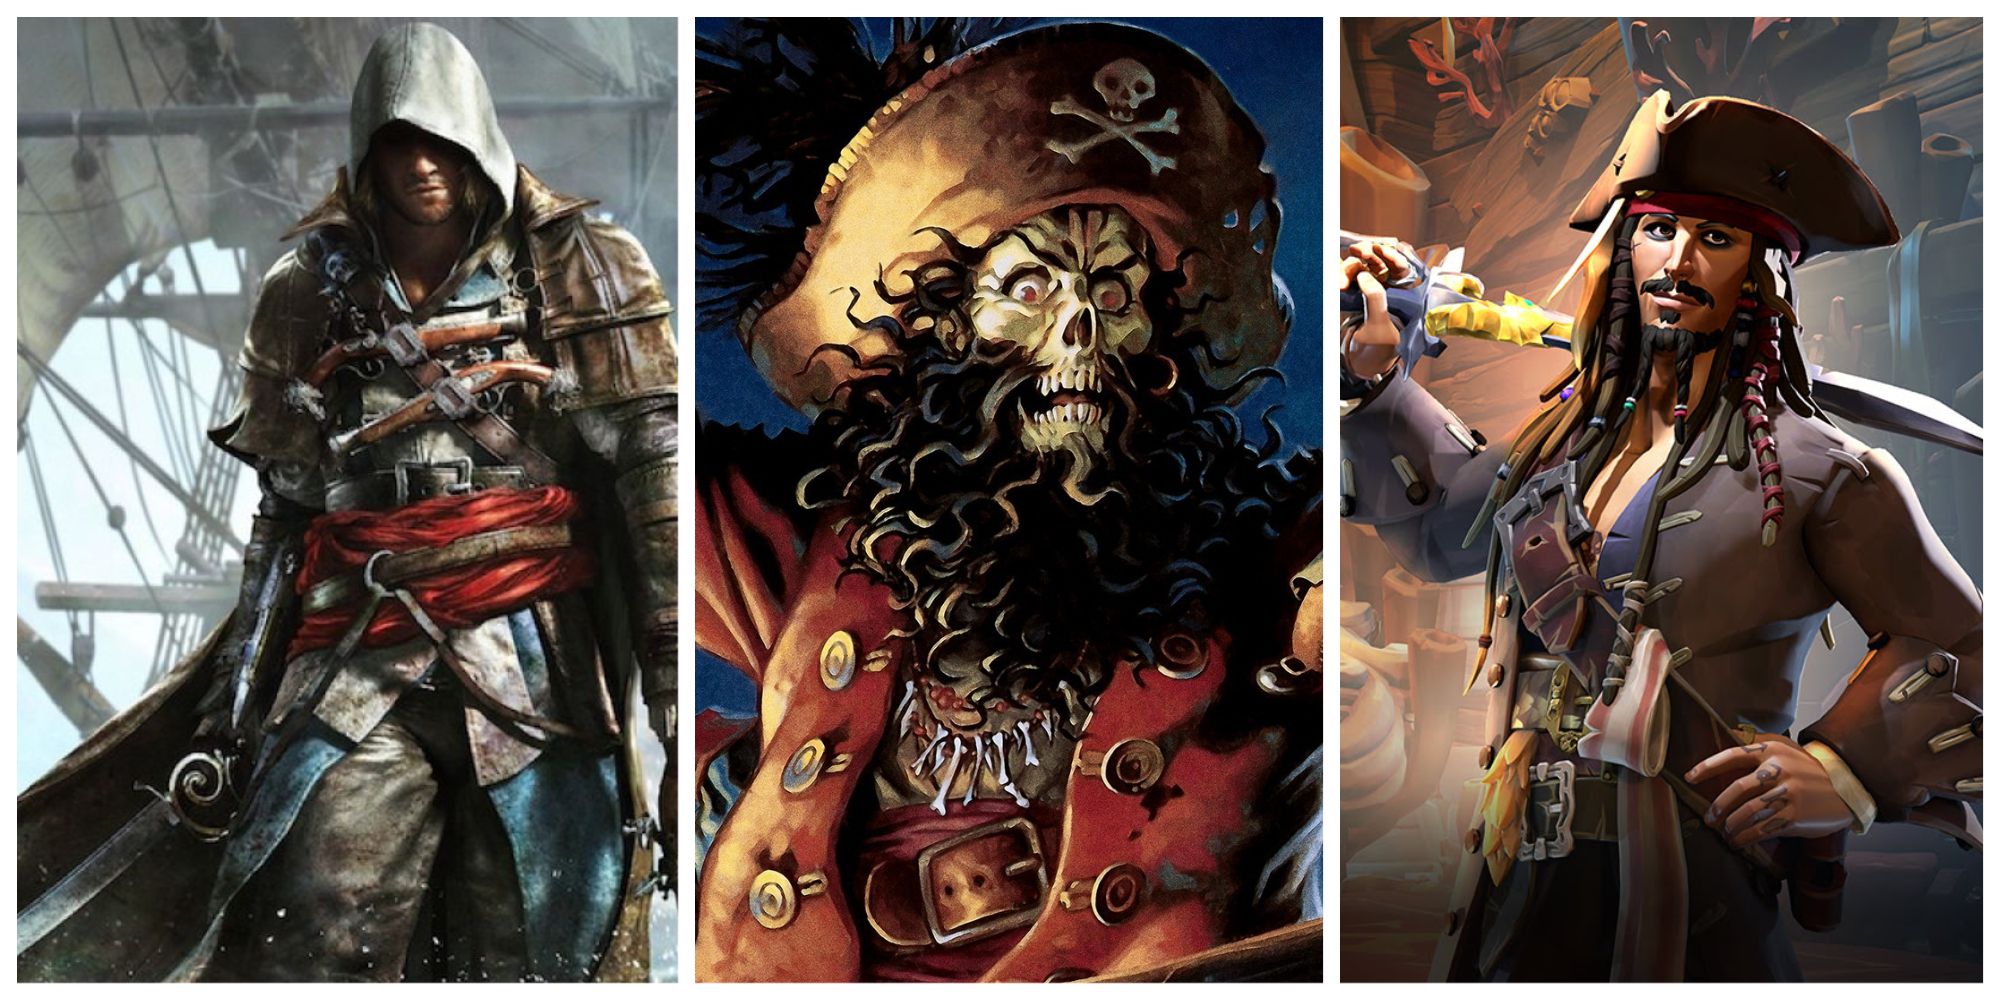 Pirate Themed Games Assassins Creed Edward Monkey Island LeChuck Sea of Thieves Jack Sparrow